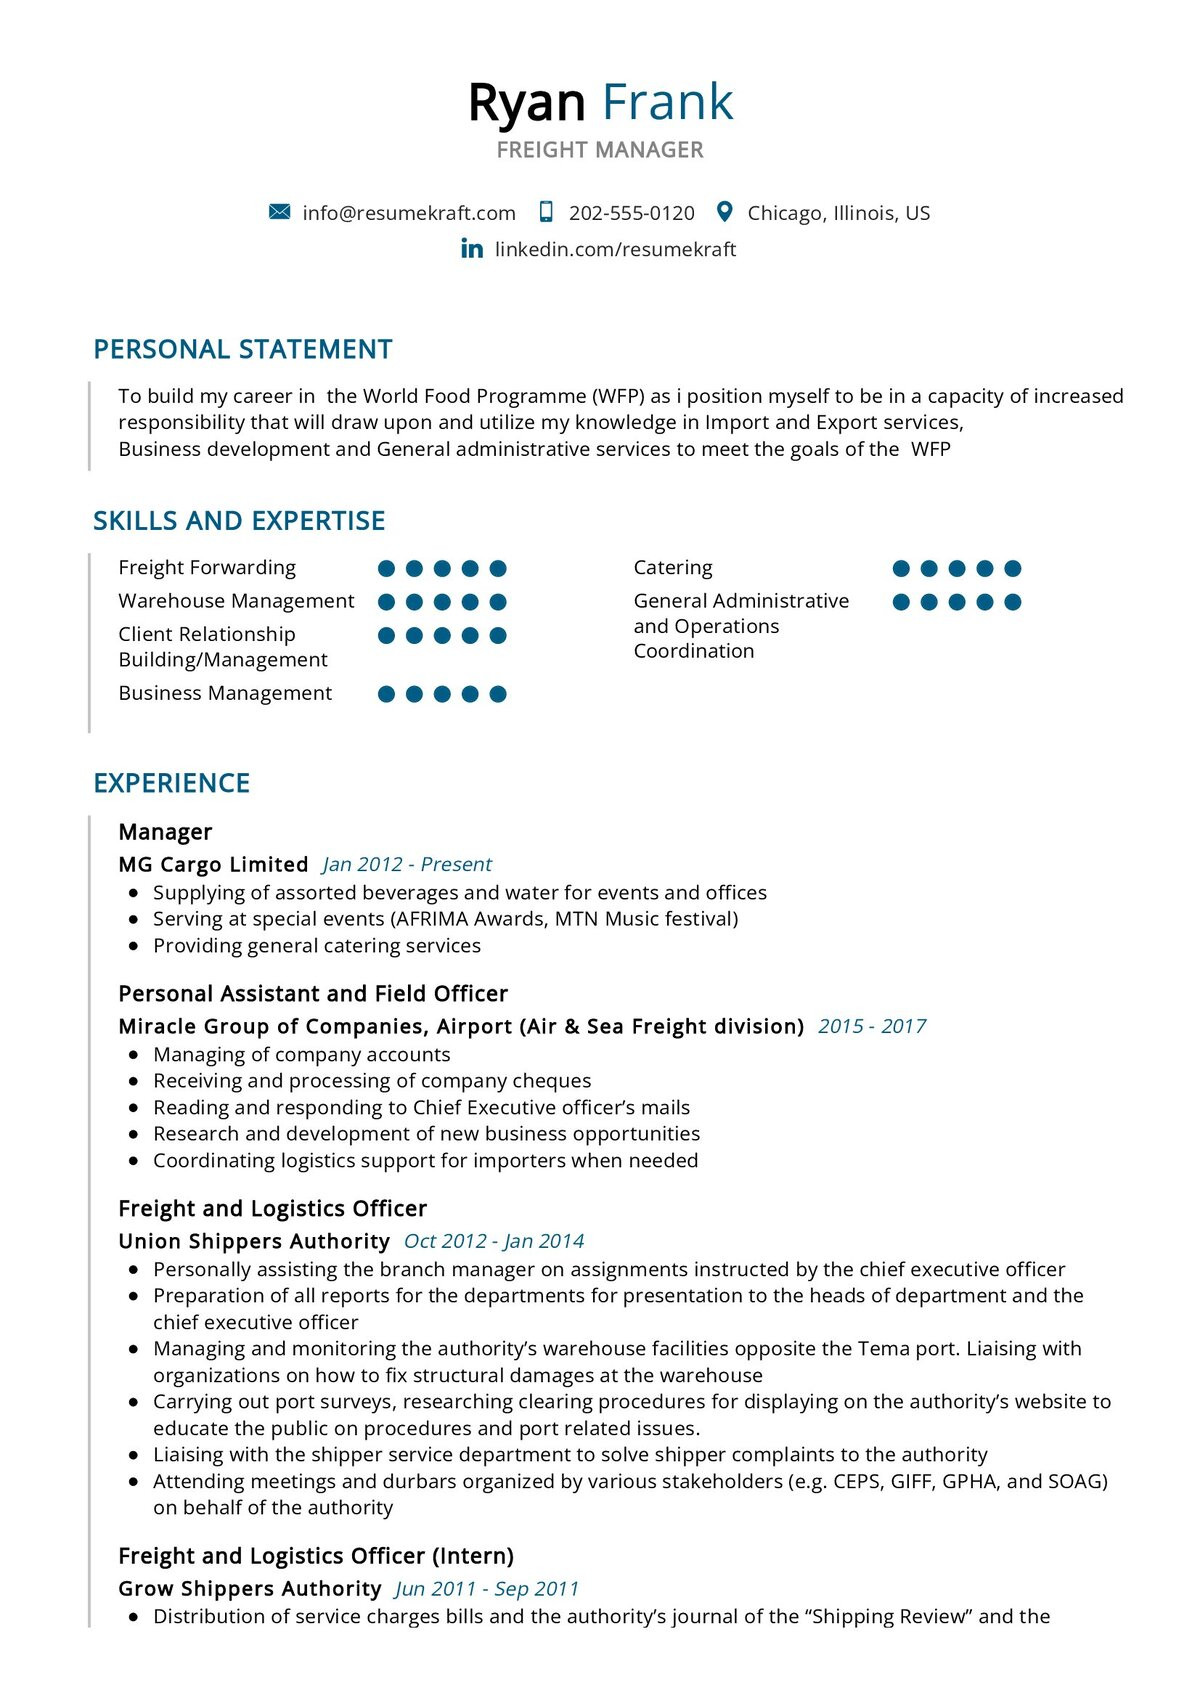 Order Process and Ship Resume Sample Freight Manager Resume Example 2022 Writing Tips – Resumekraft